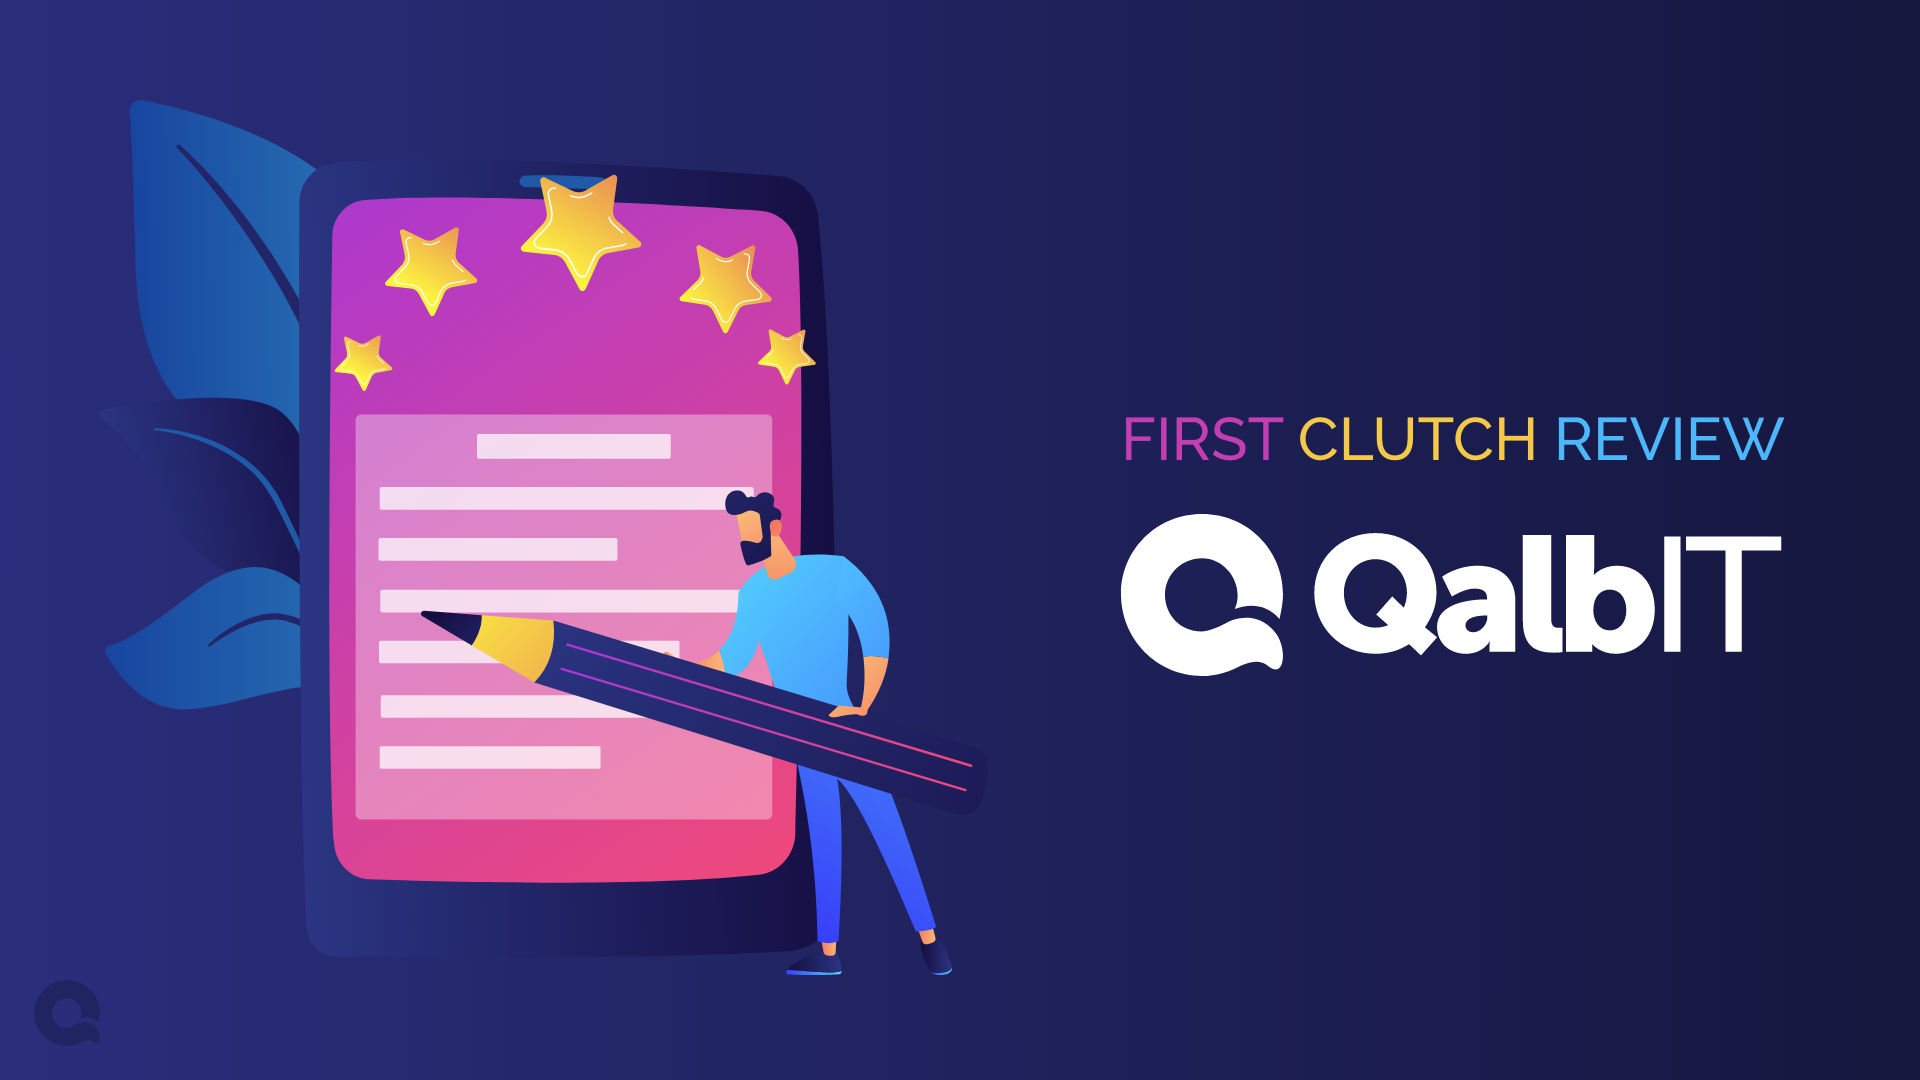 QalbIT Solution Receives First Clutch Review